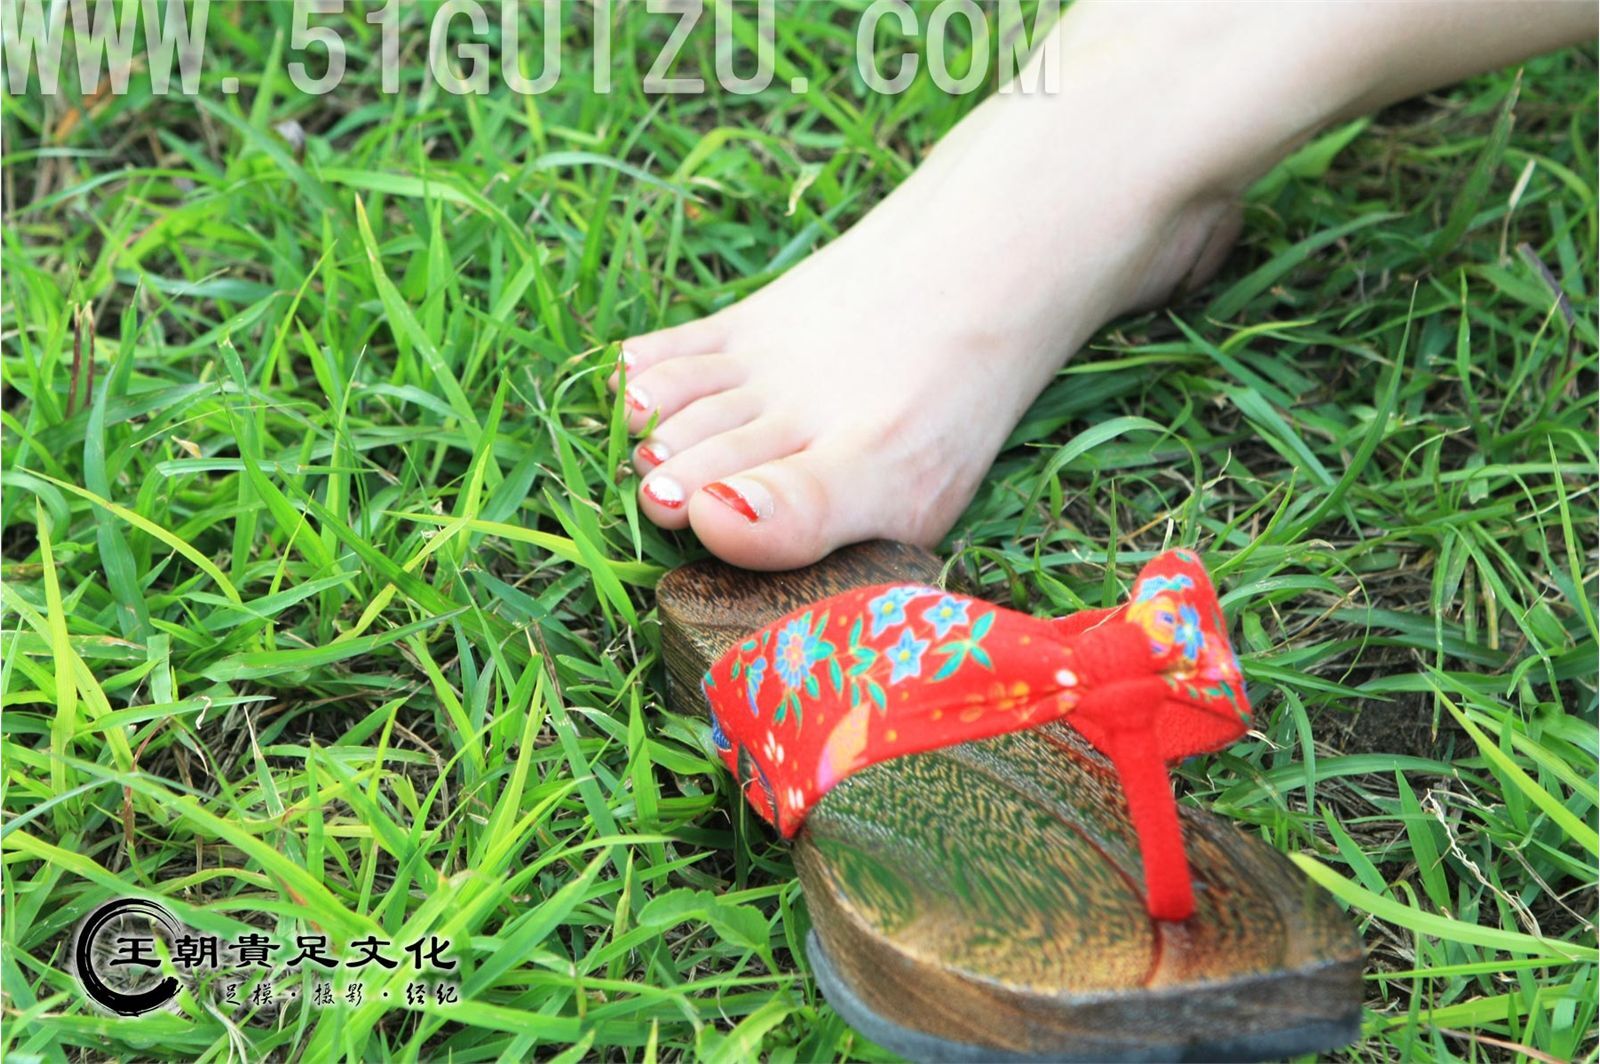 [outdoor set] sexy photo of the latest model of dynasty foot model